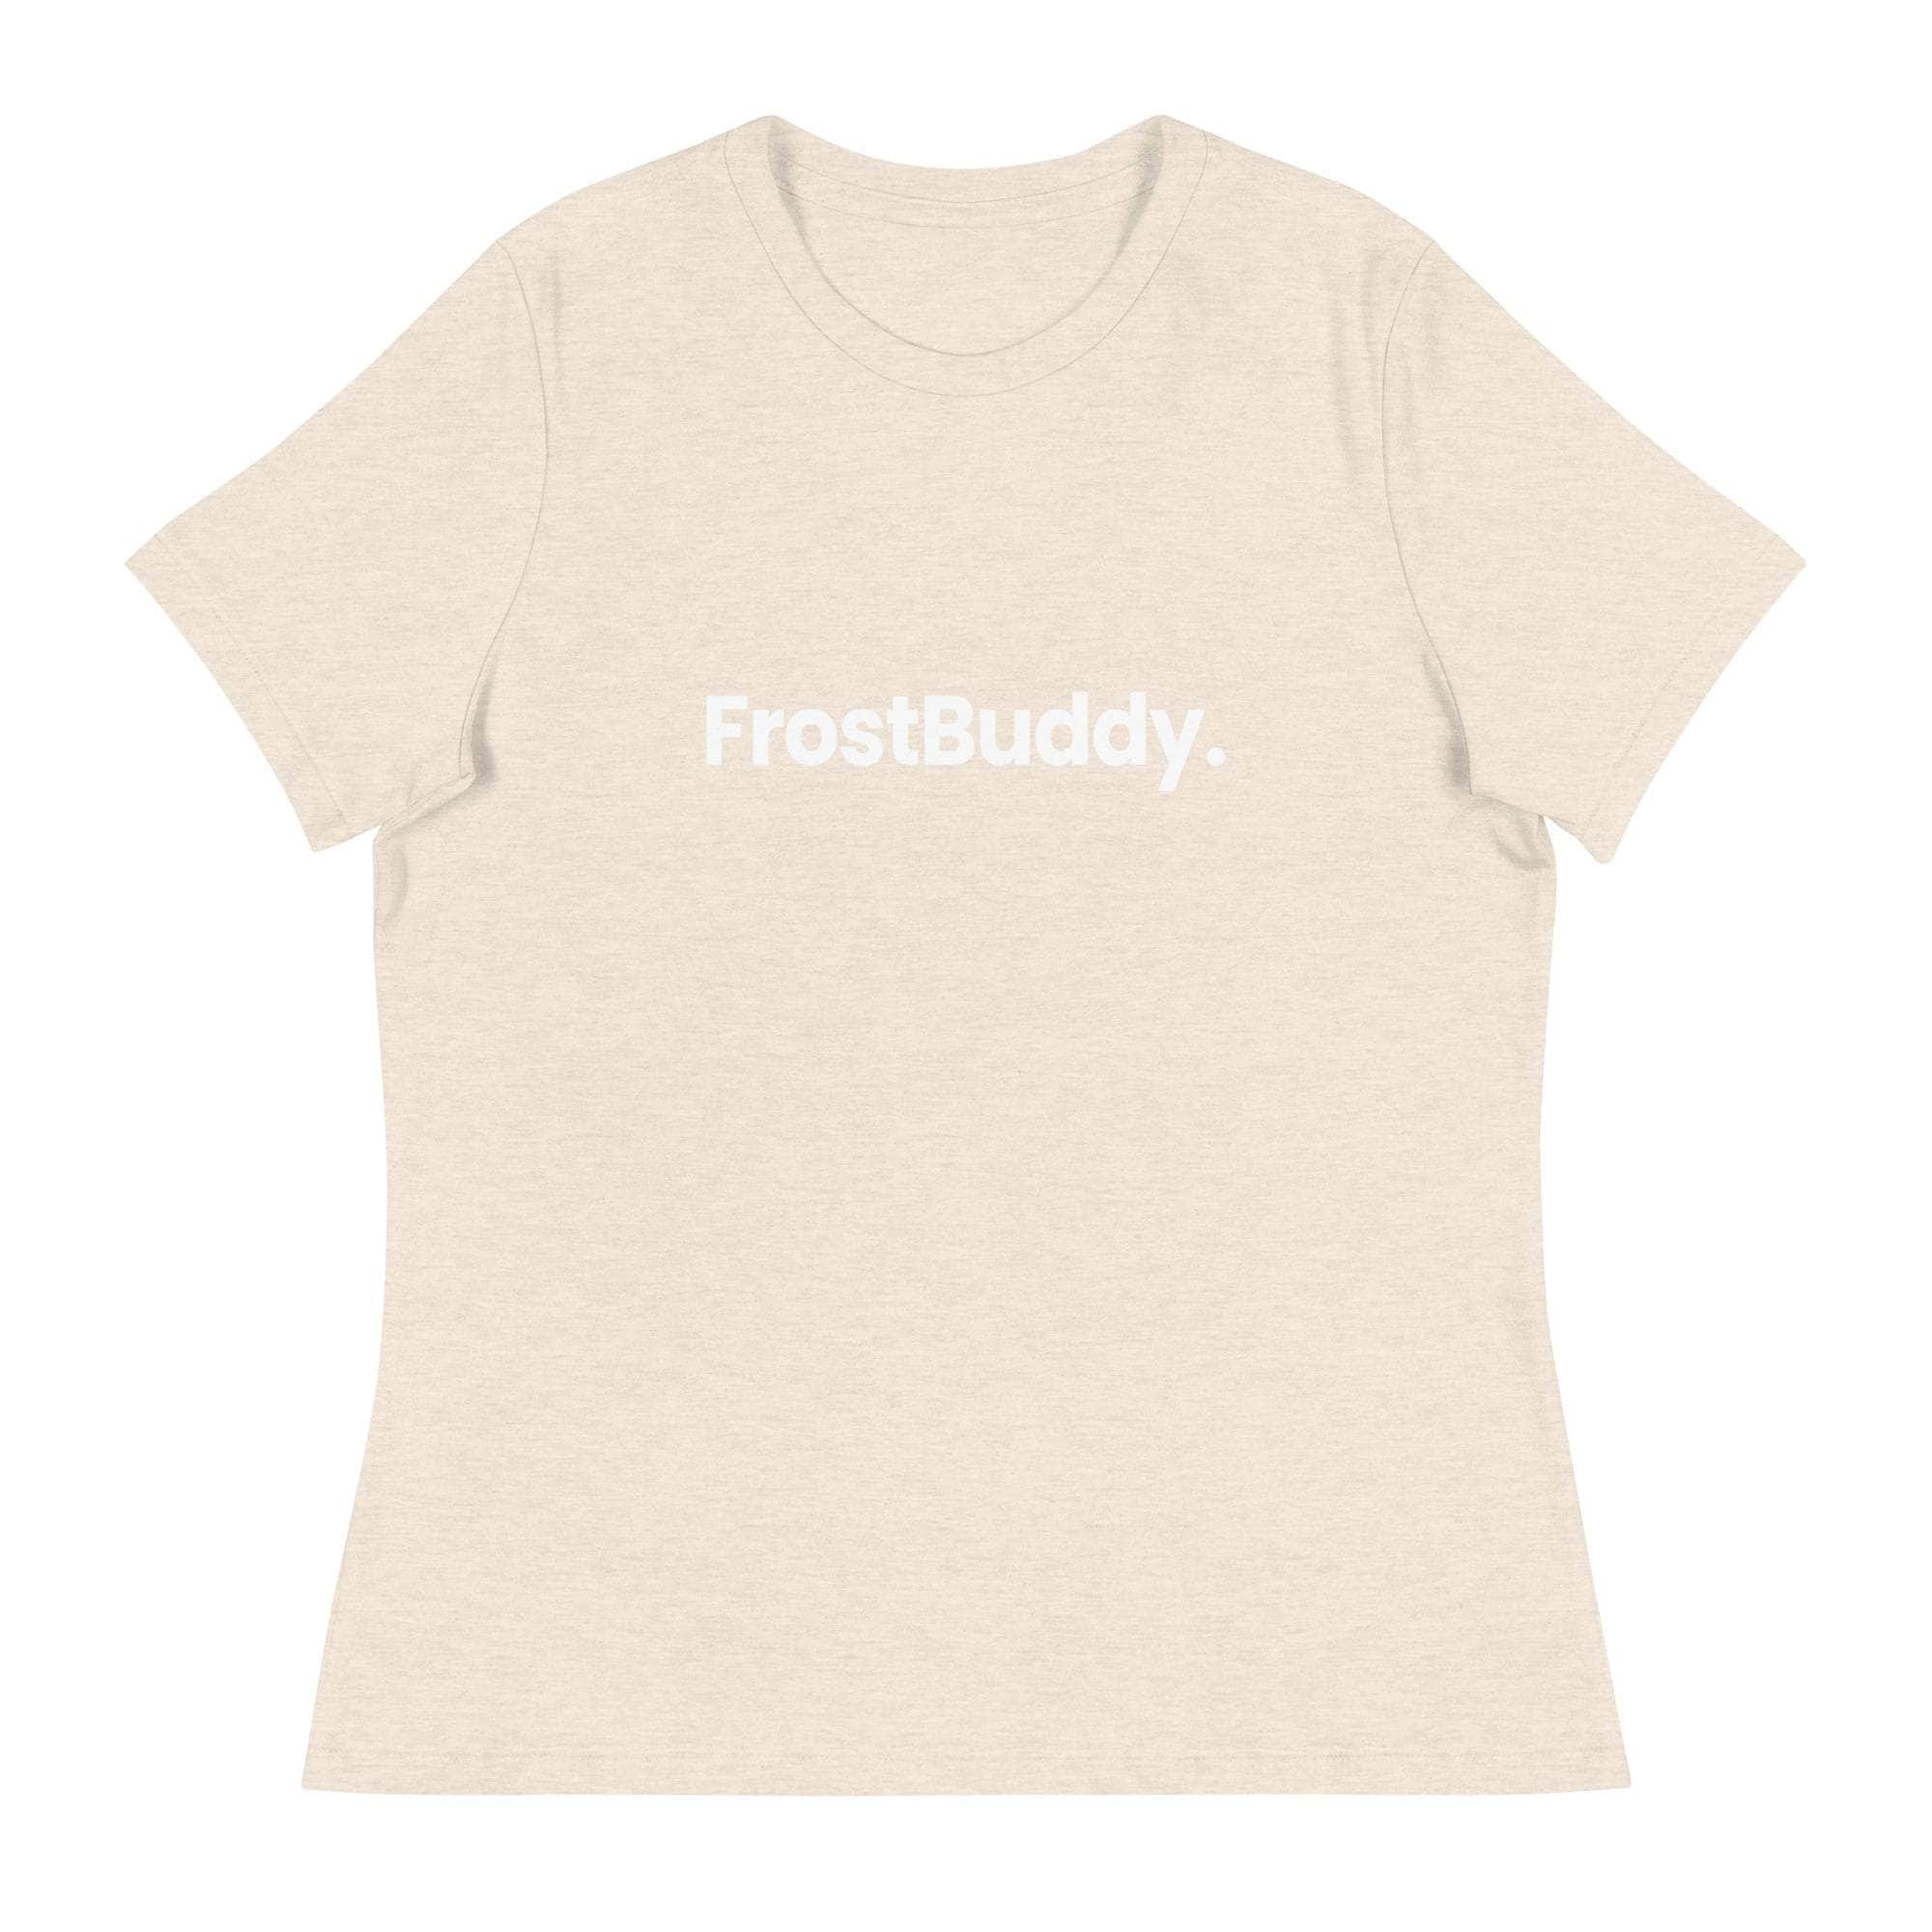 Frost Buddy  Heather Prism Natural / S Logo Women's Relaxed T-Shirt